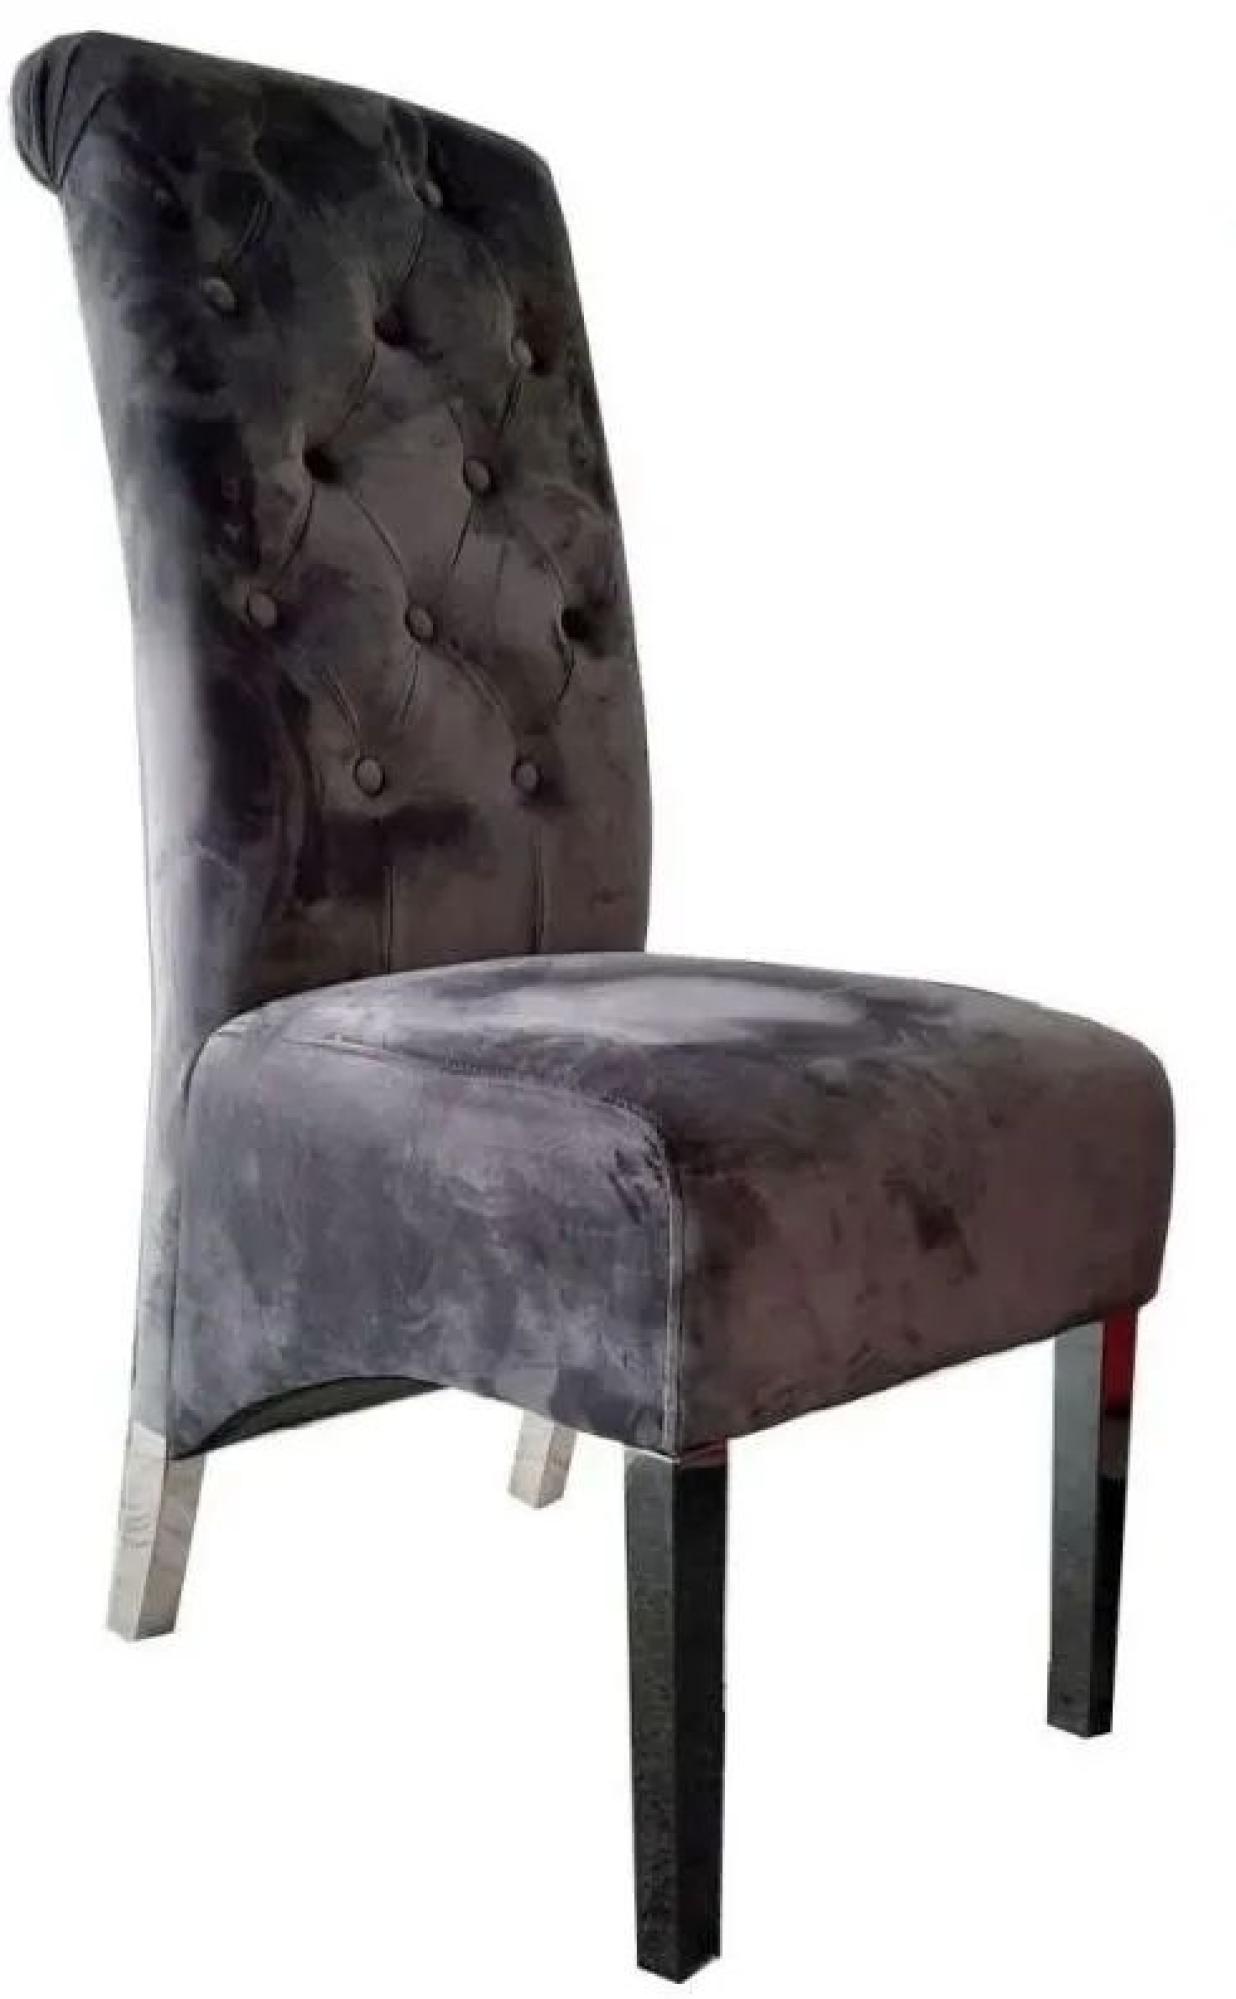 Clearance - Liberty Dark Grey Fabric Lion Knockerback Dining Chair with Chrome Legs (Sold in Pairs) - FS128